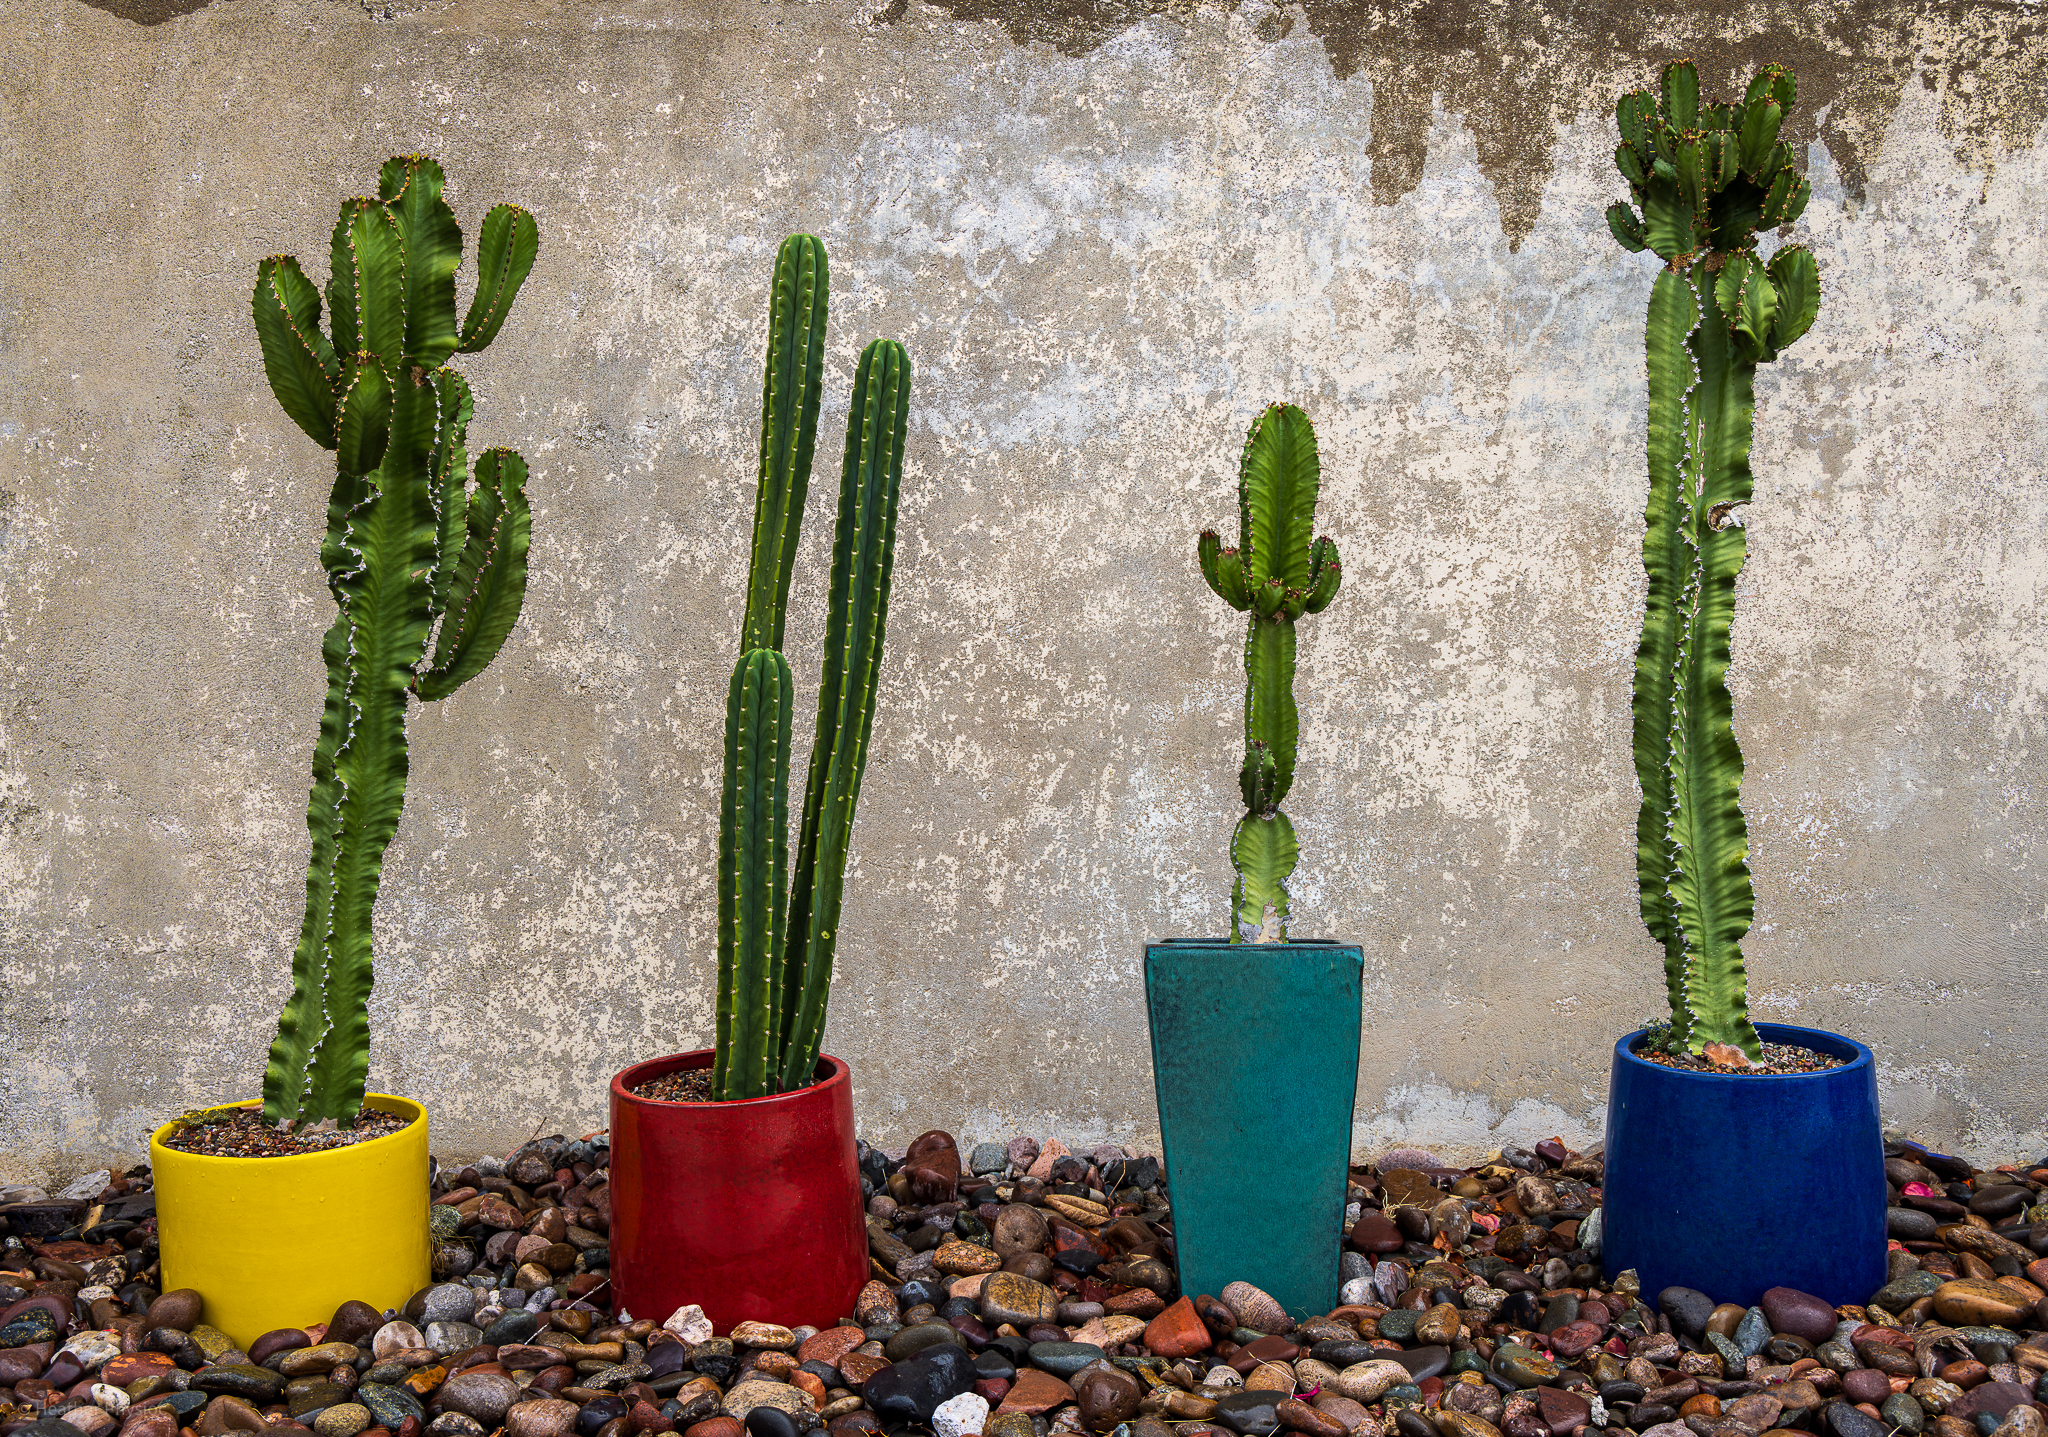 Four cactuses in multi-colored pots in San Diego